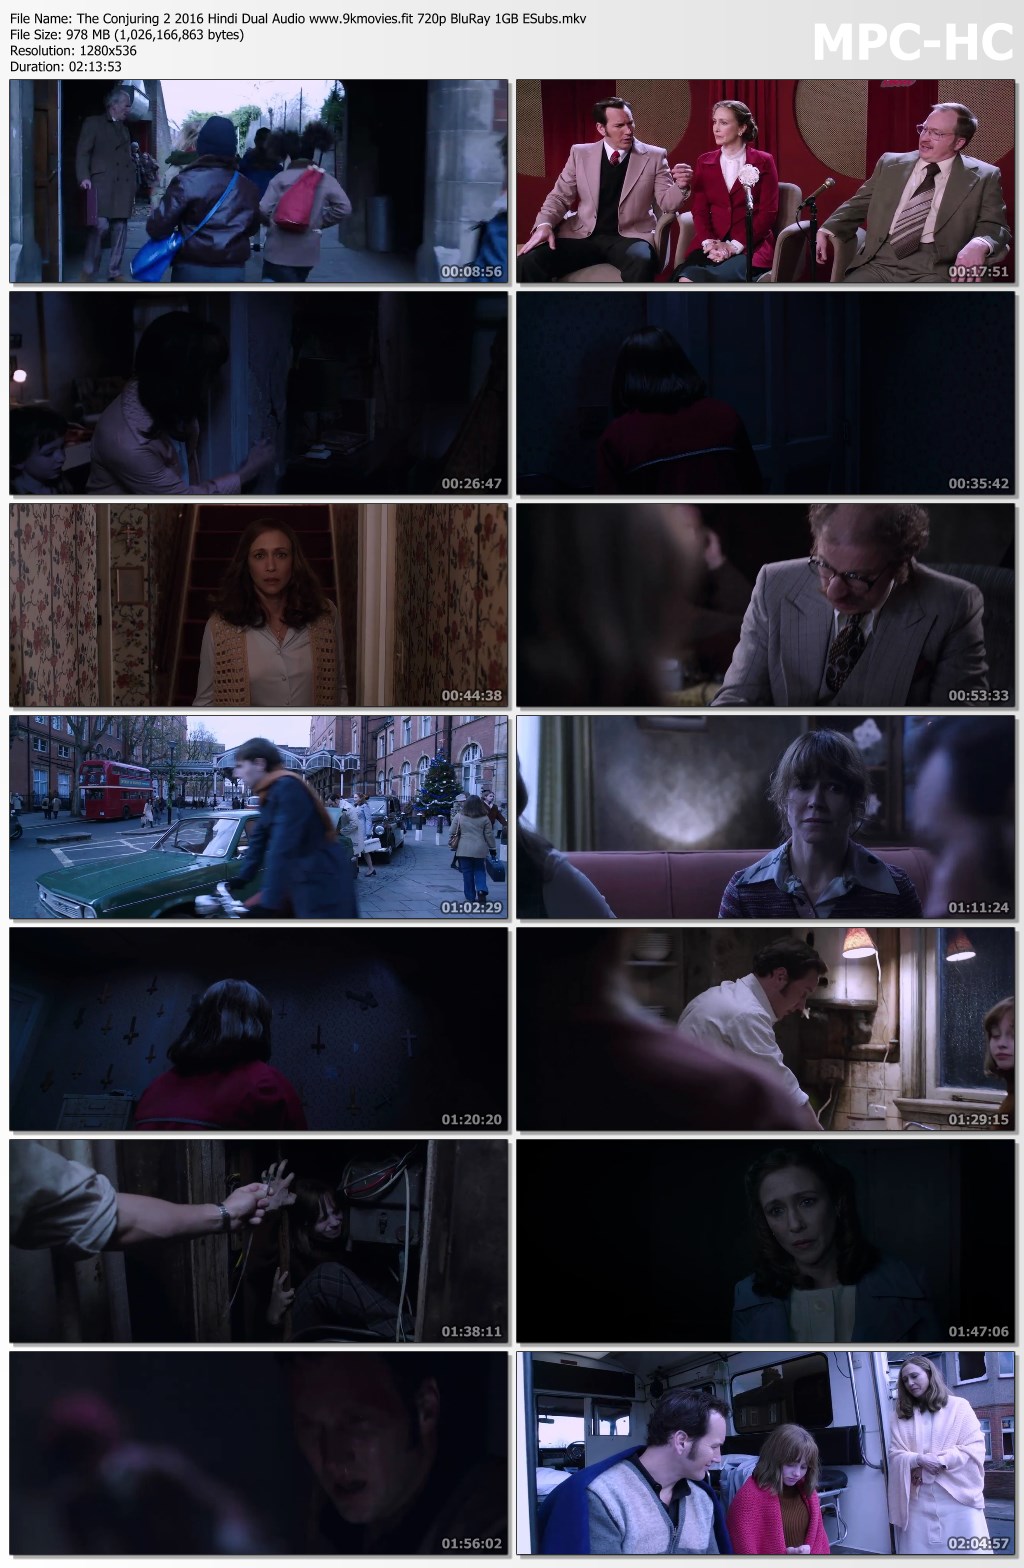 the conjuring 2 full movie hd online 1080